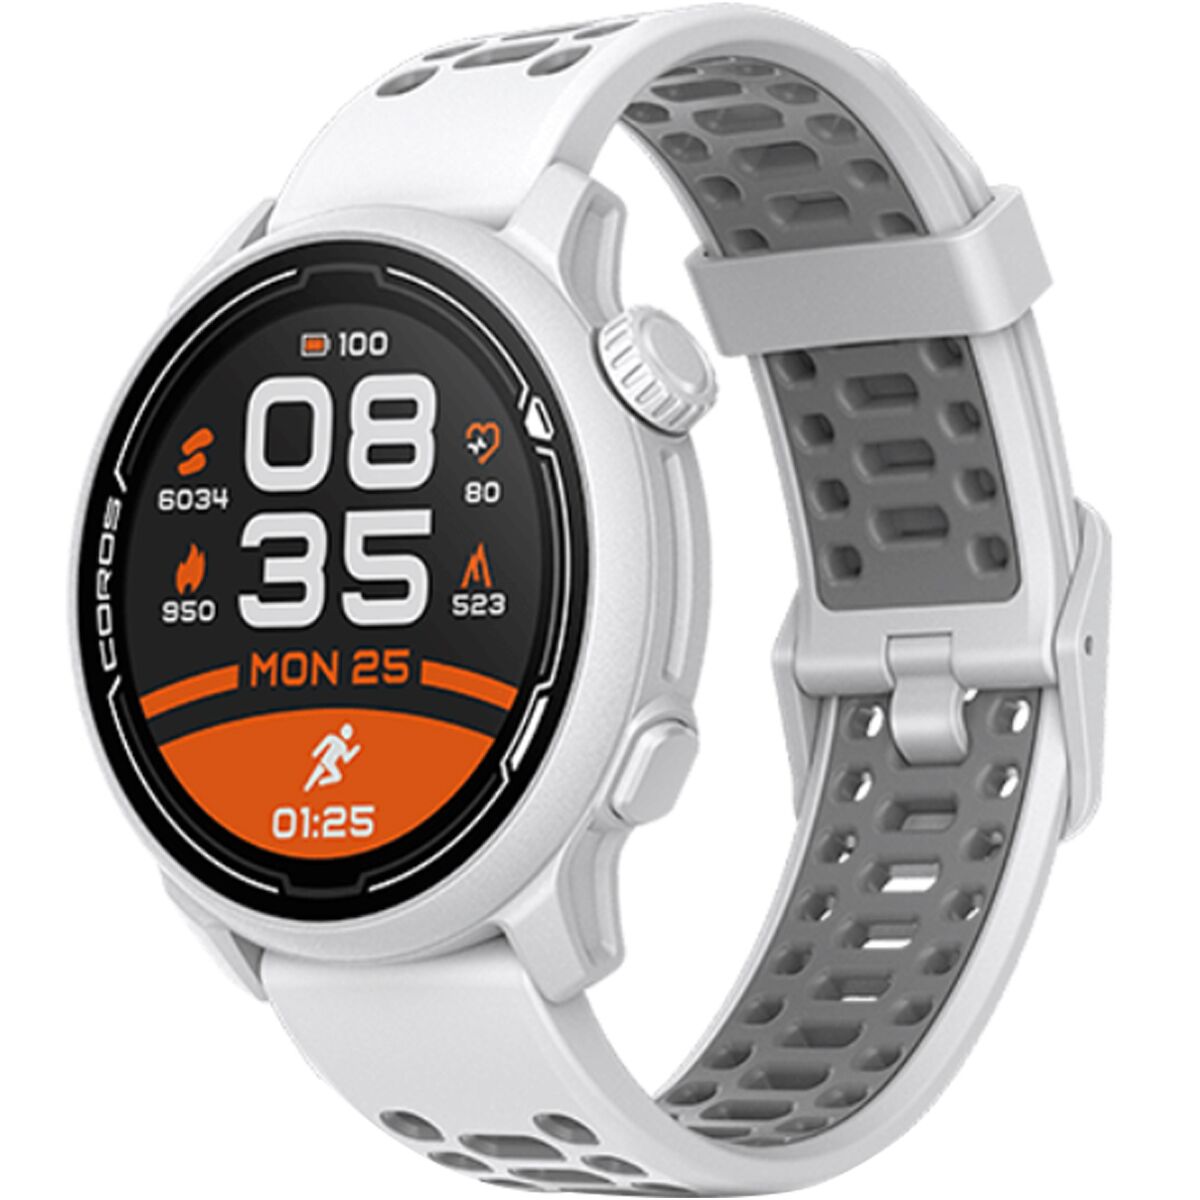 COROS PACE 2 Sport Watch GPS Heart Rate Monitor, 20 Days